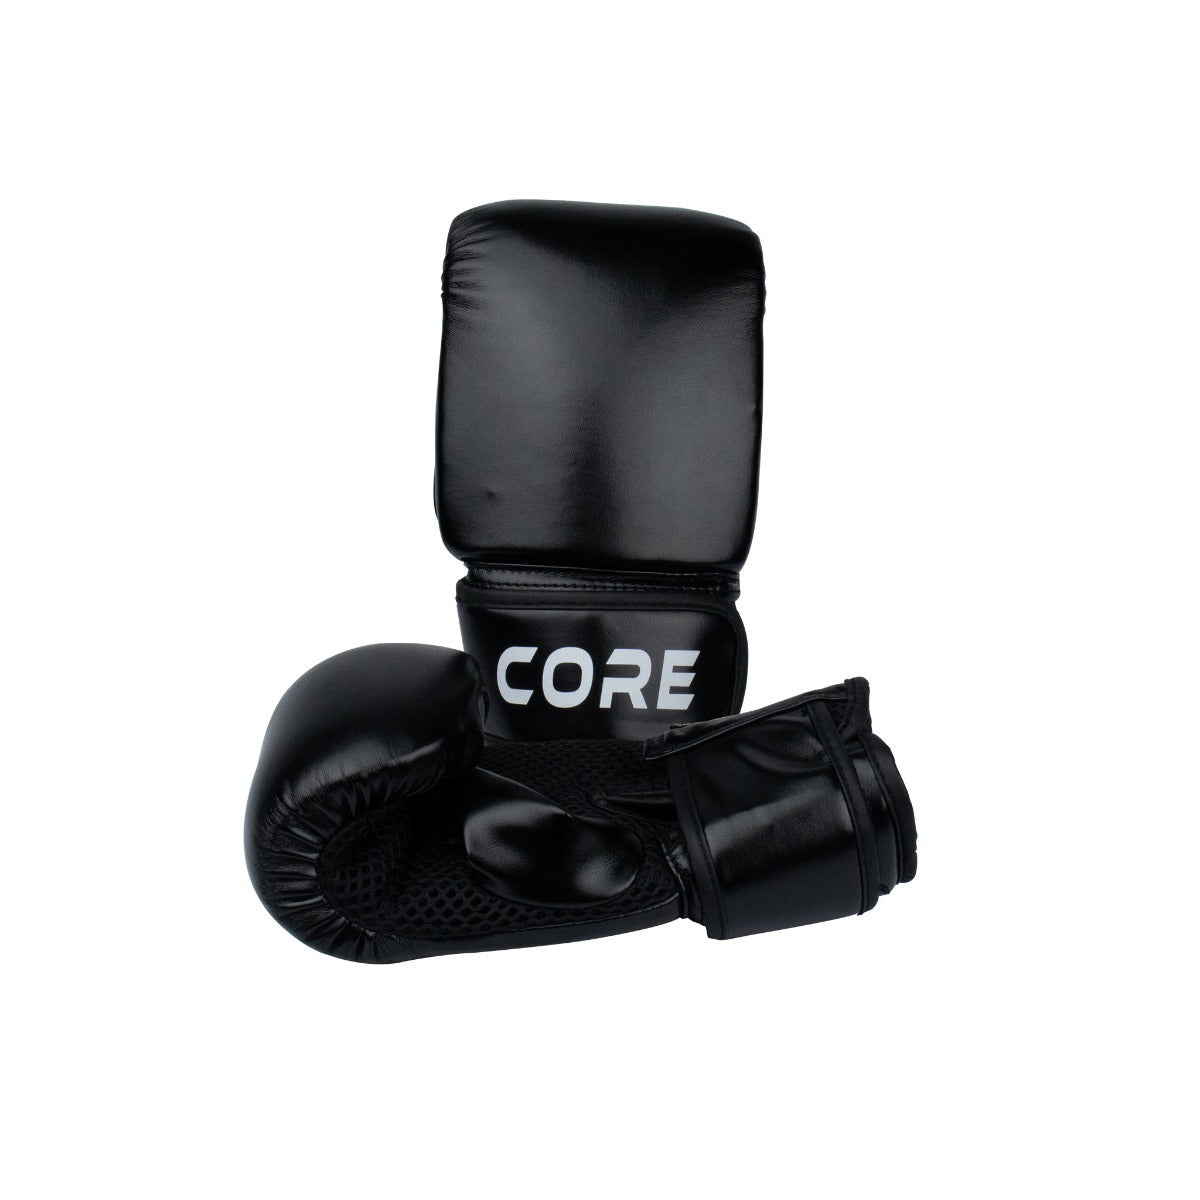 Core Boxing Gloves